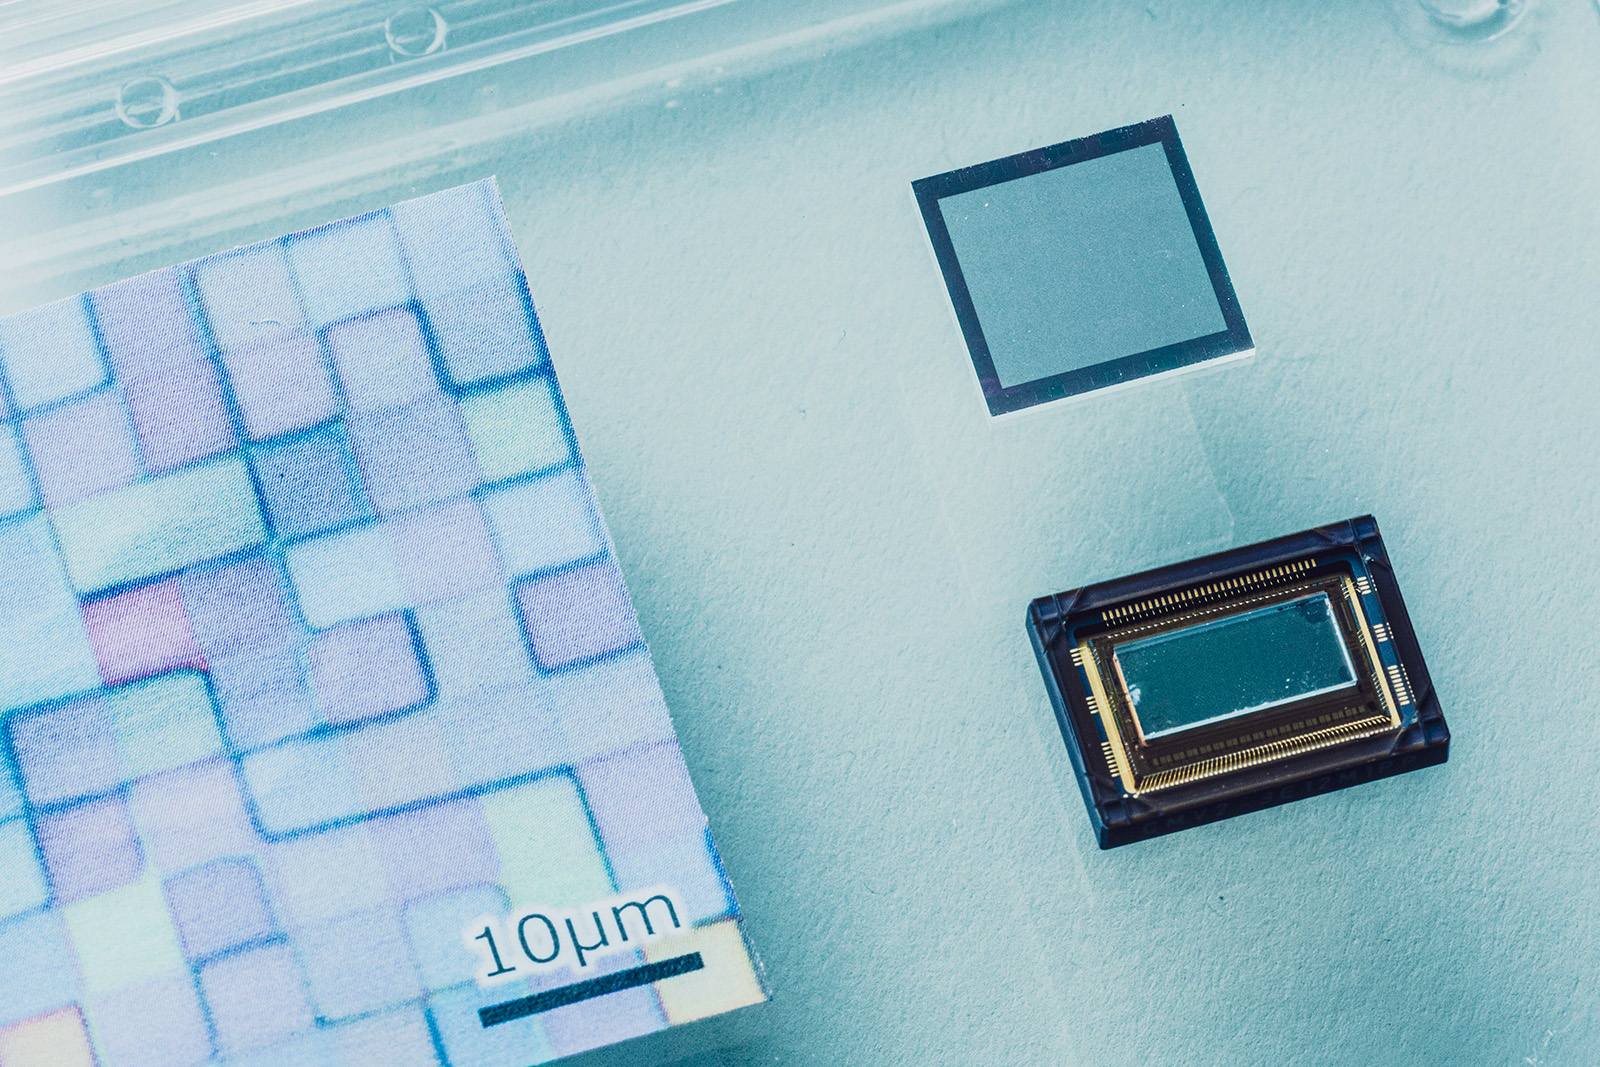 Photo: An image sensor and a special filter